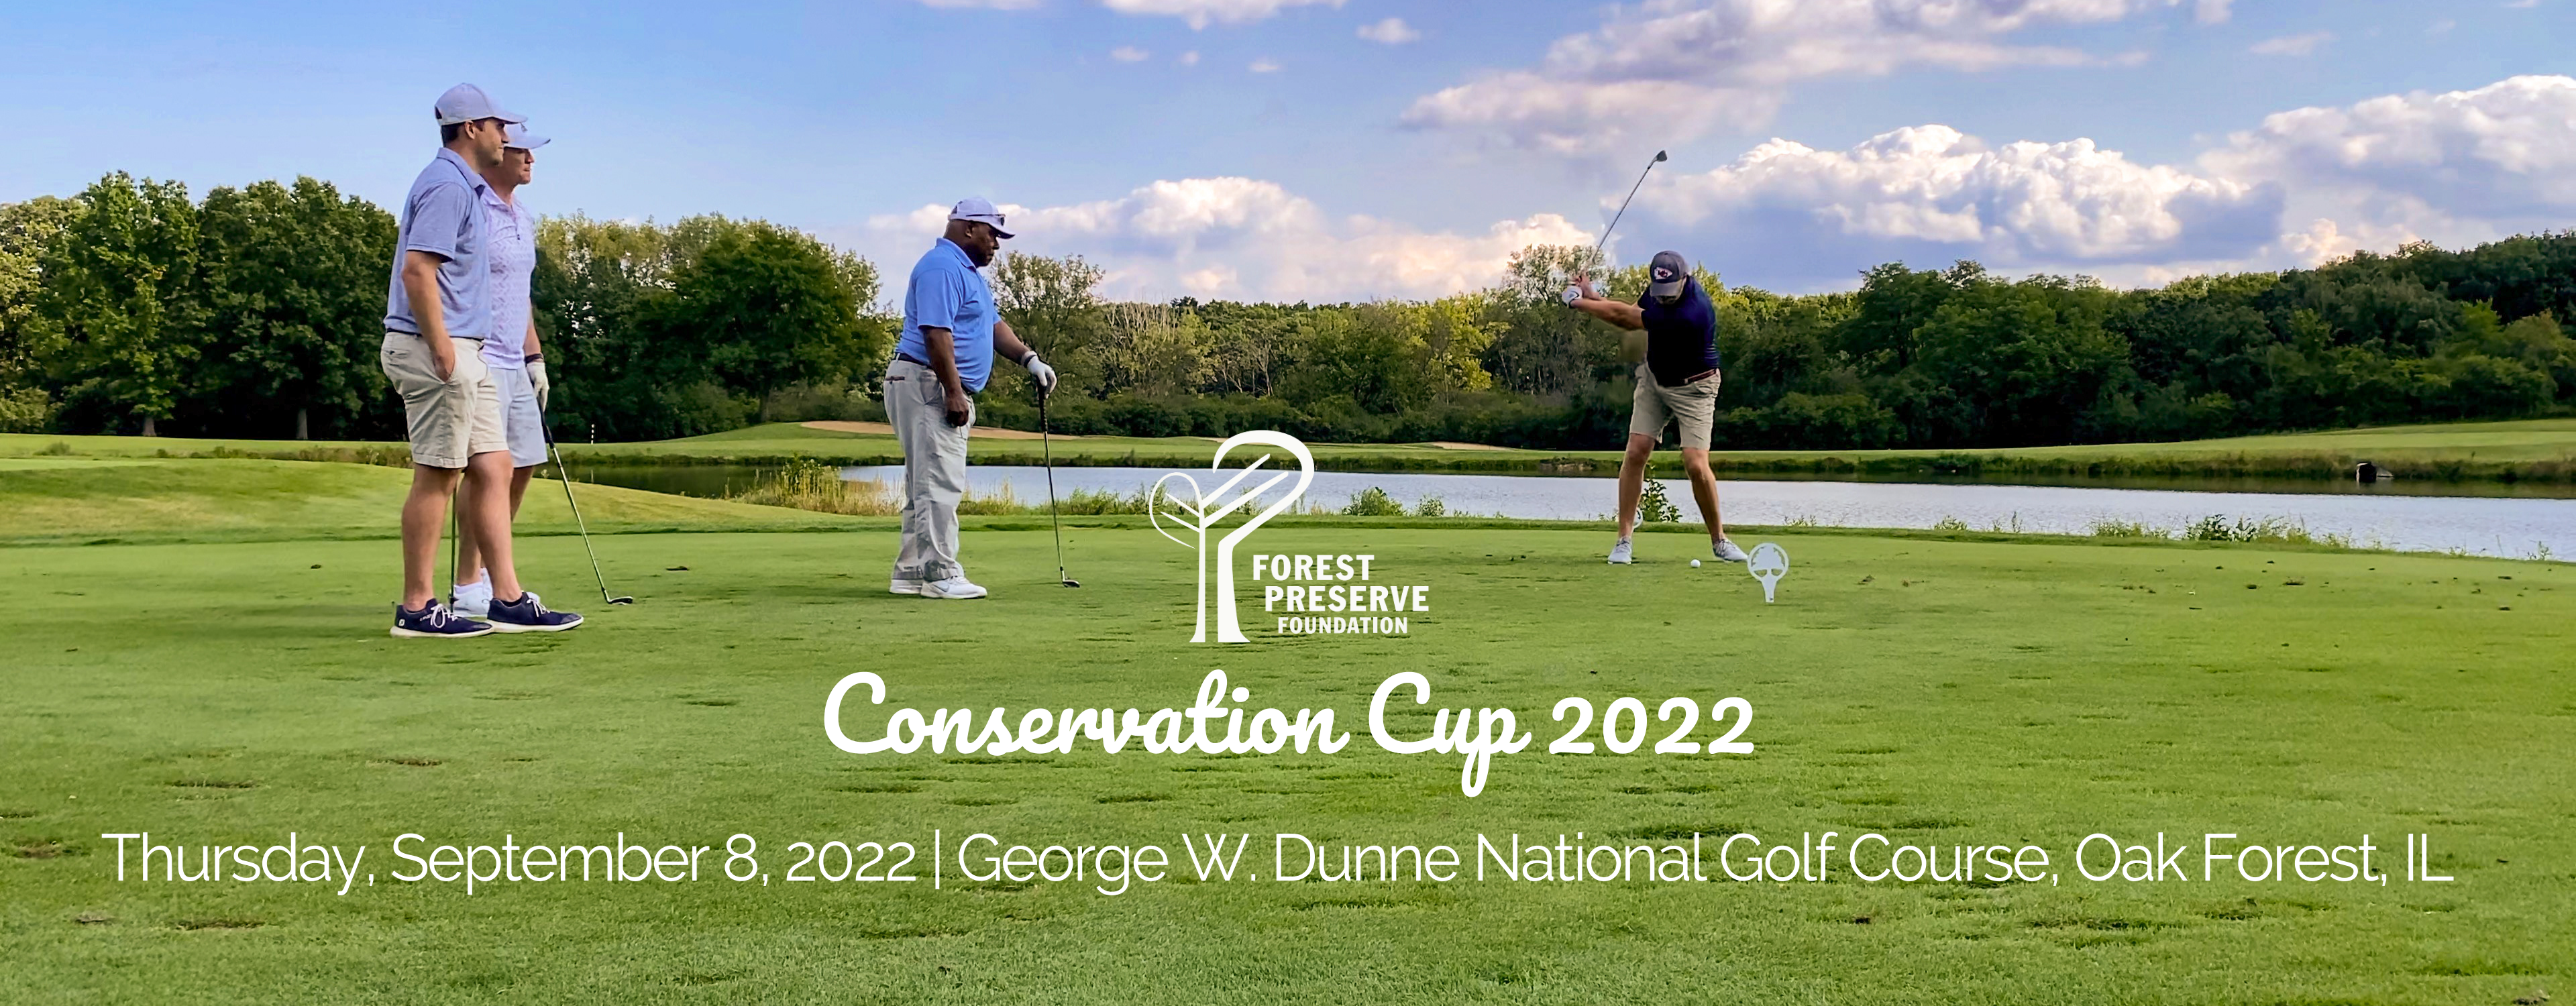 Photo of 4 golfers with blue skies, fluffy white clouds and lush green of a forest preserve golf course. Text reads "Forest Preserve Foundation Conservation Cup 2022, Thursday, September 8, 2022, George W. Dunne National Golf Course, Oak Forest, IL